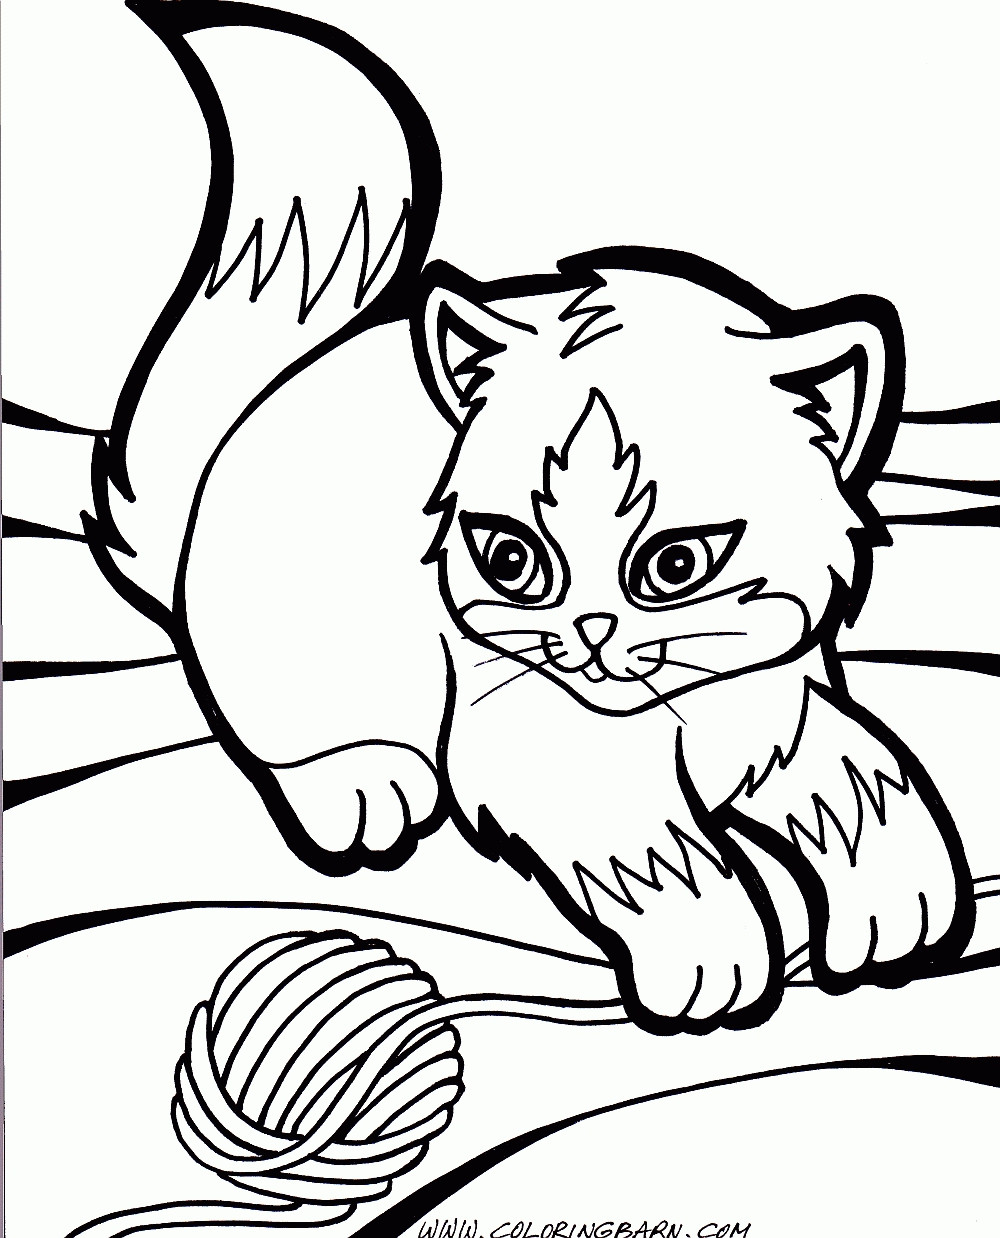 Cat Coloring Pages For Kids
 Printable Cat Coloring Pages For Kids at GetDrawings